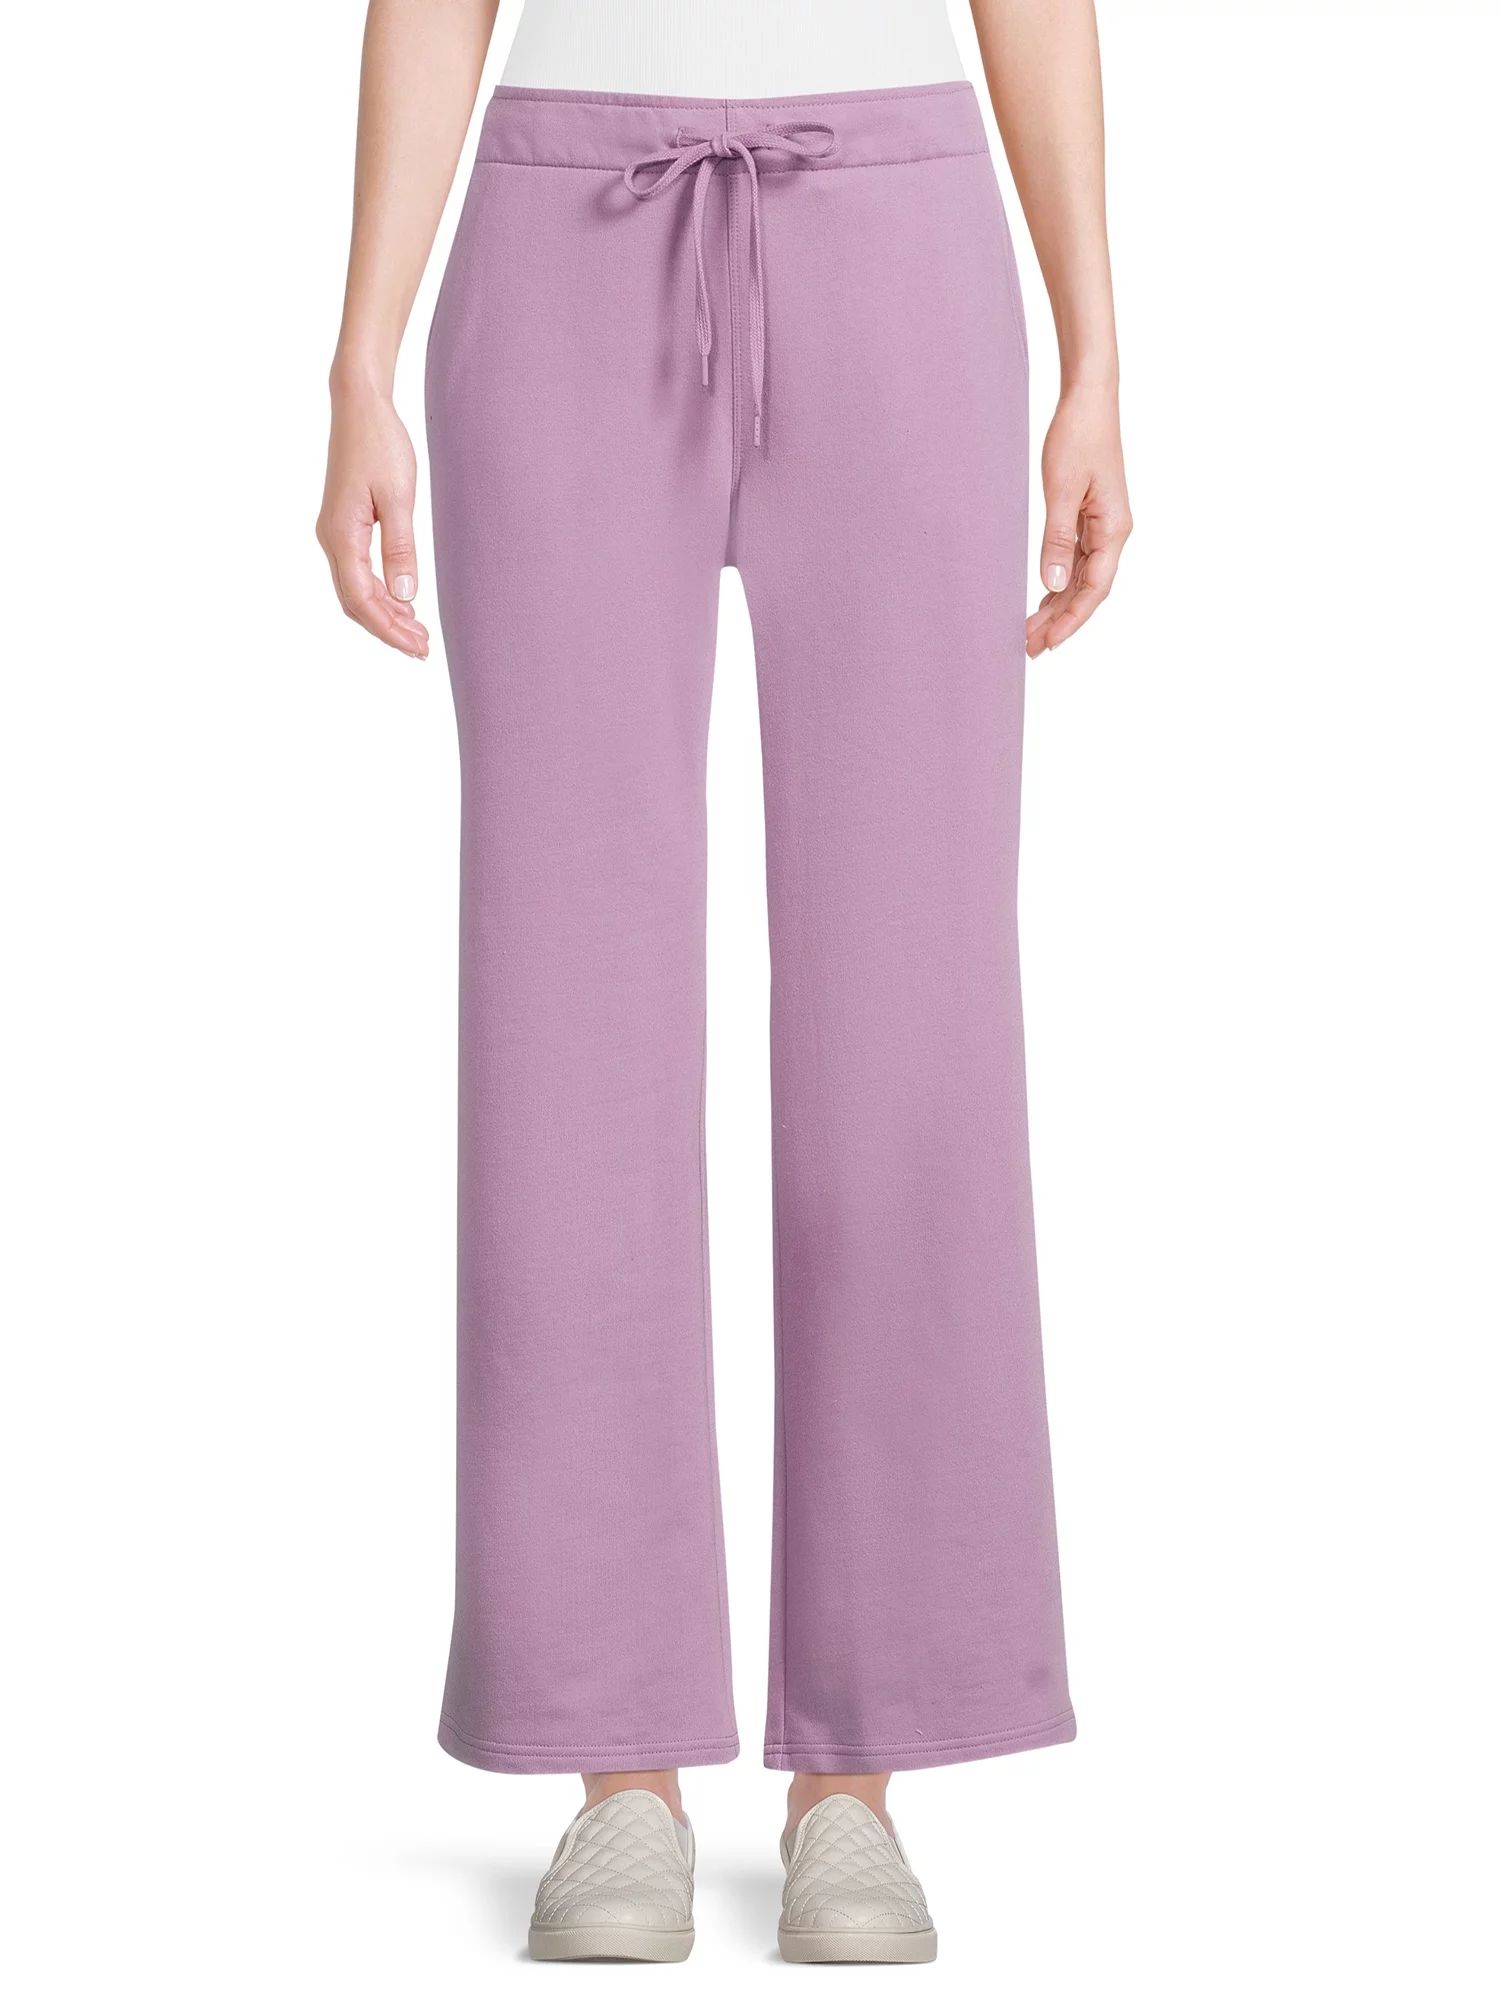 Avia Women’s French Terry Flare Leg Sweatpants with Side Pockets | Walmart (US)